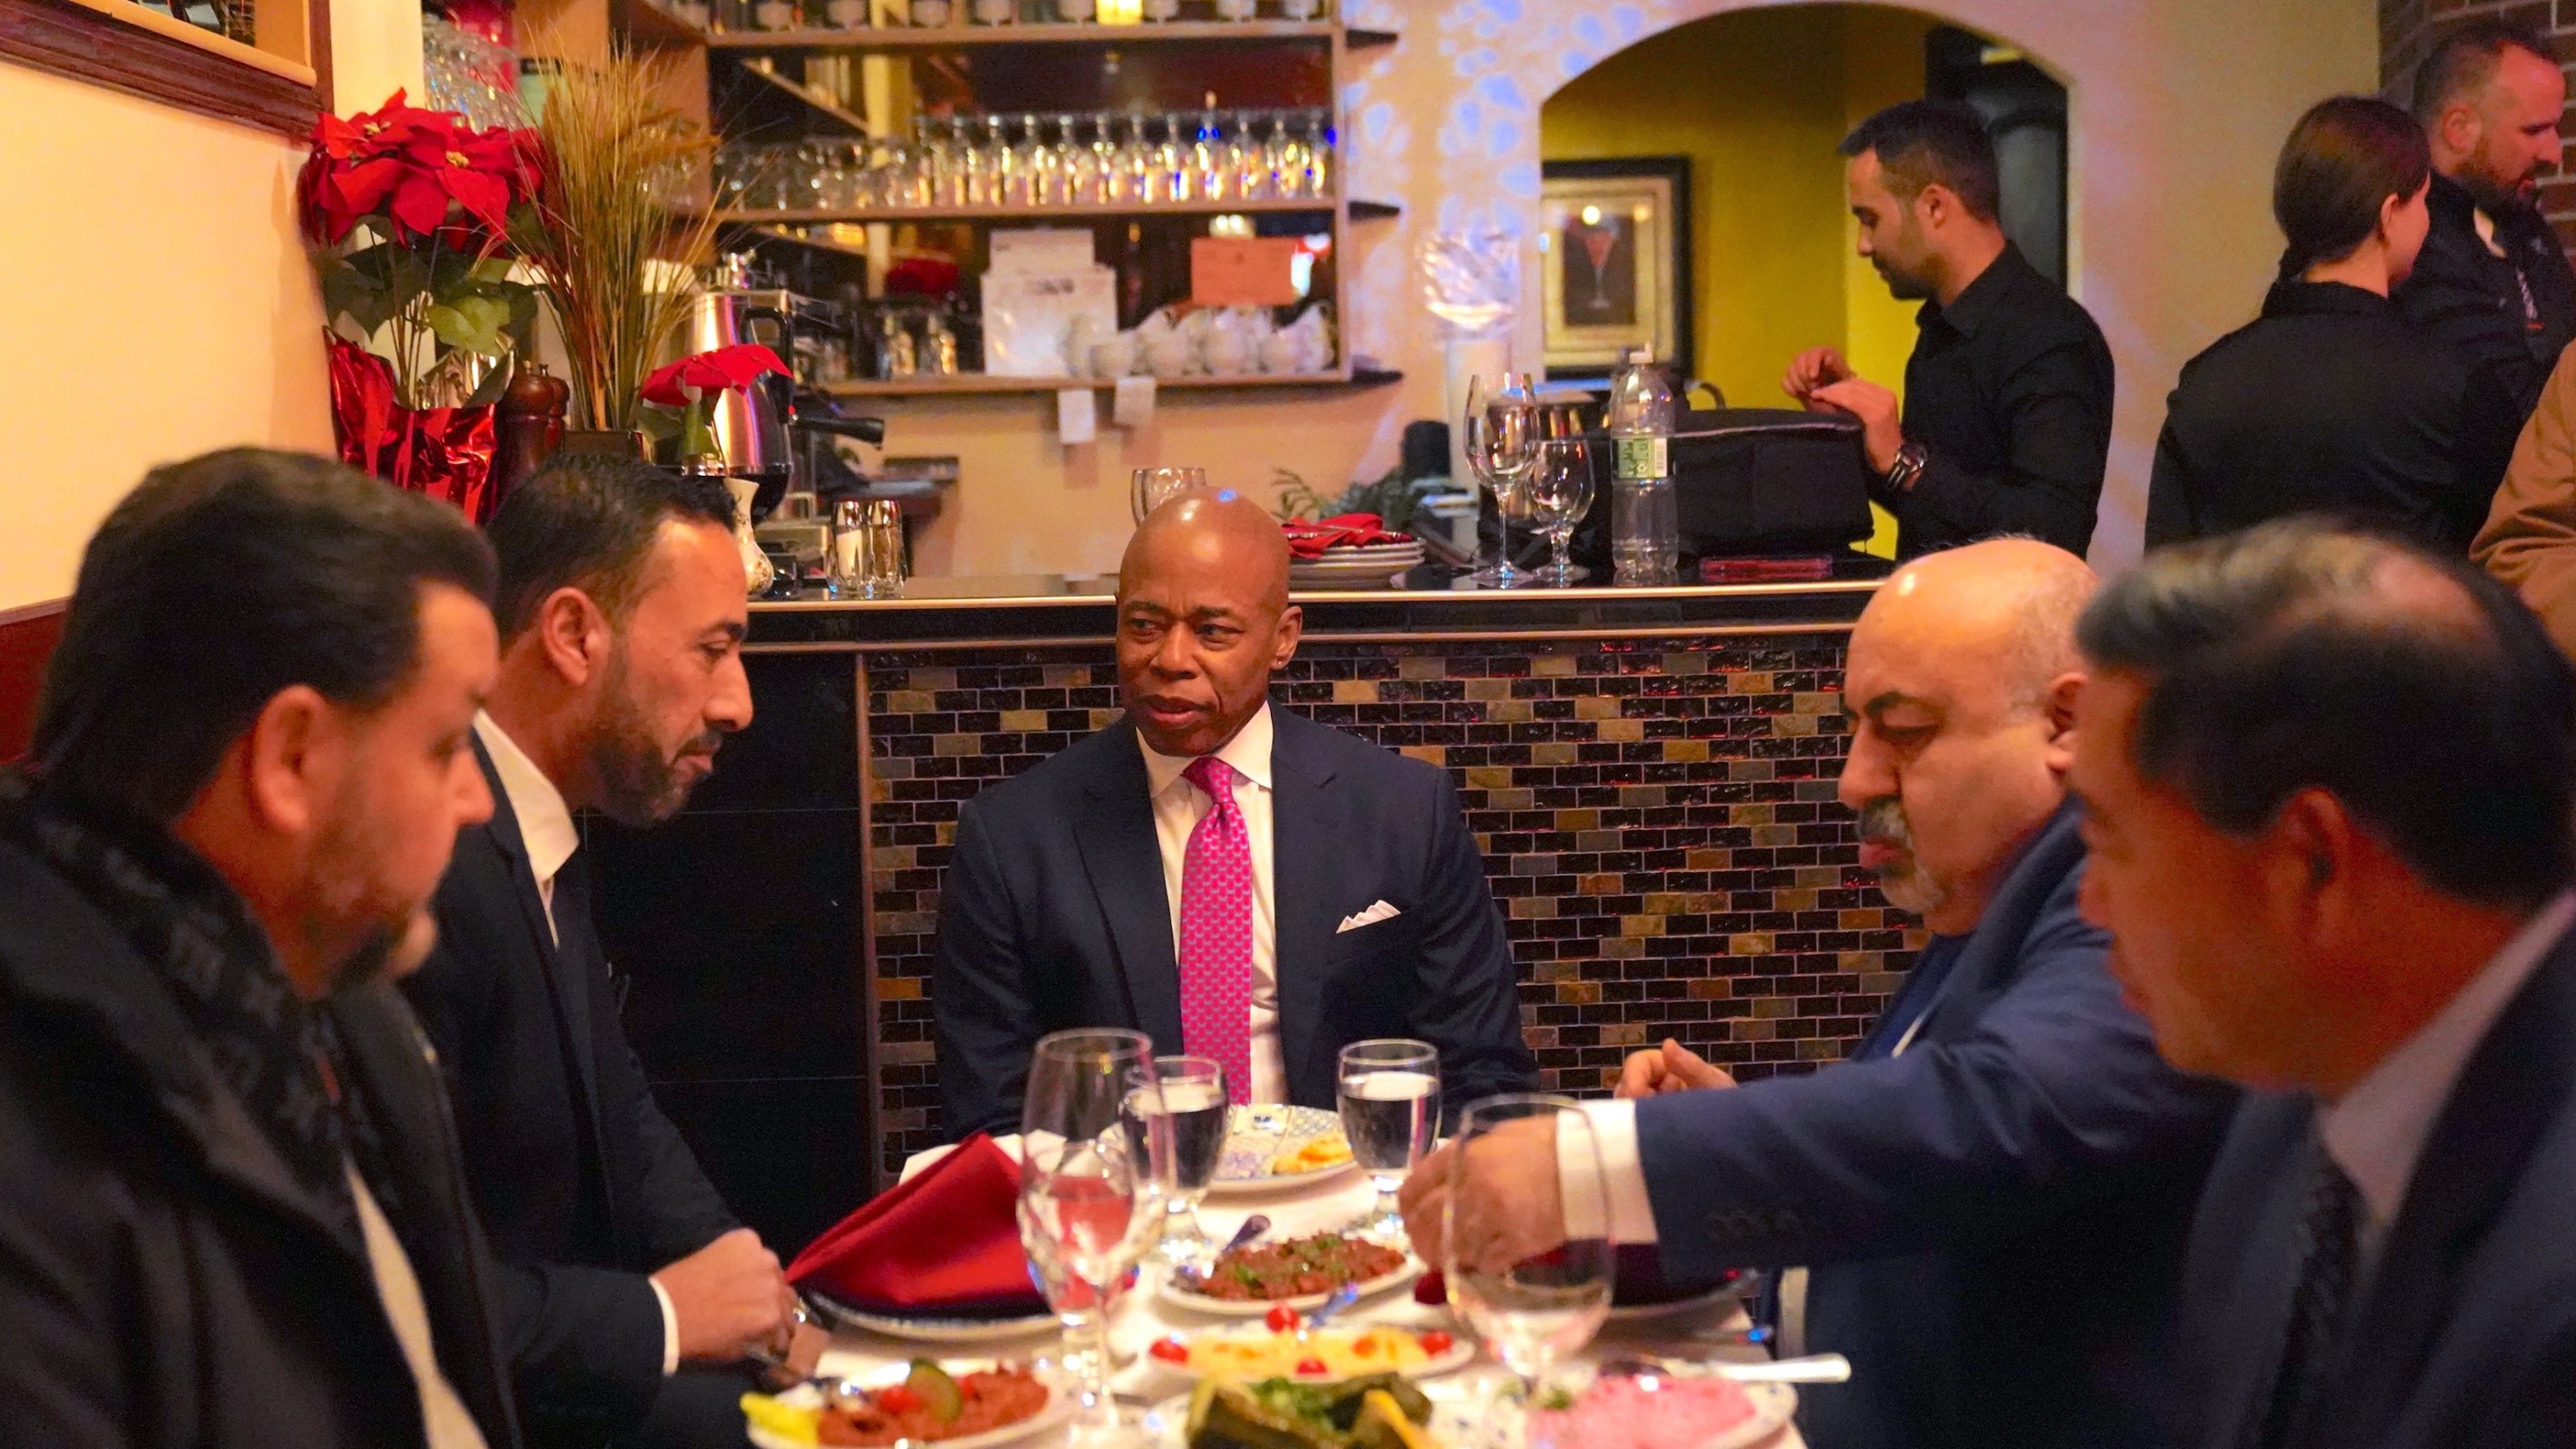 New York City Mayor Eric Adams sitting at a literal table with some restauranteurs at the Manhattan restaurant Ali Baba. This is not the same as the figurative "table of success" at which his haters are his waiters.